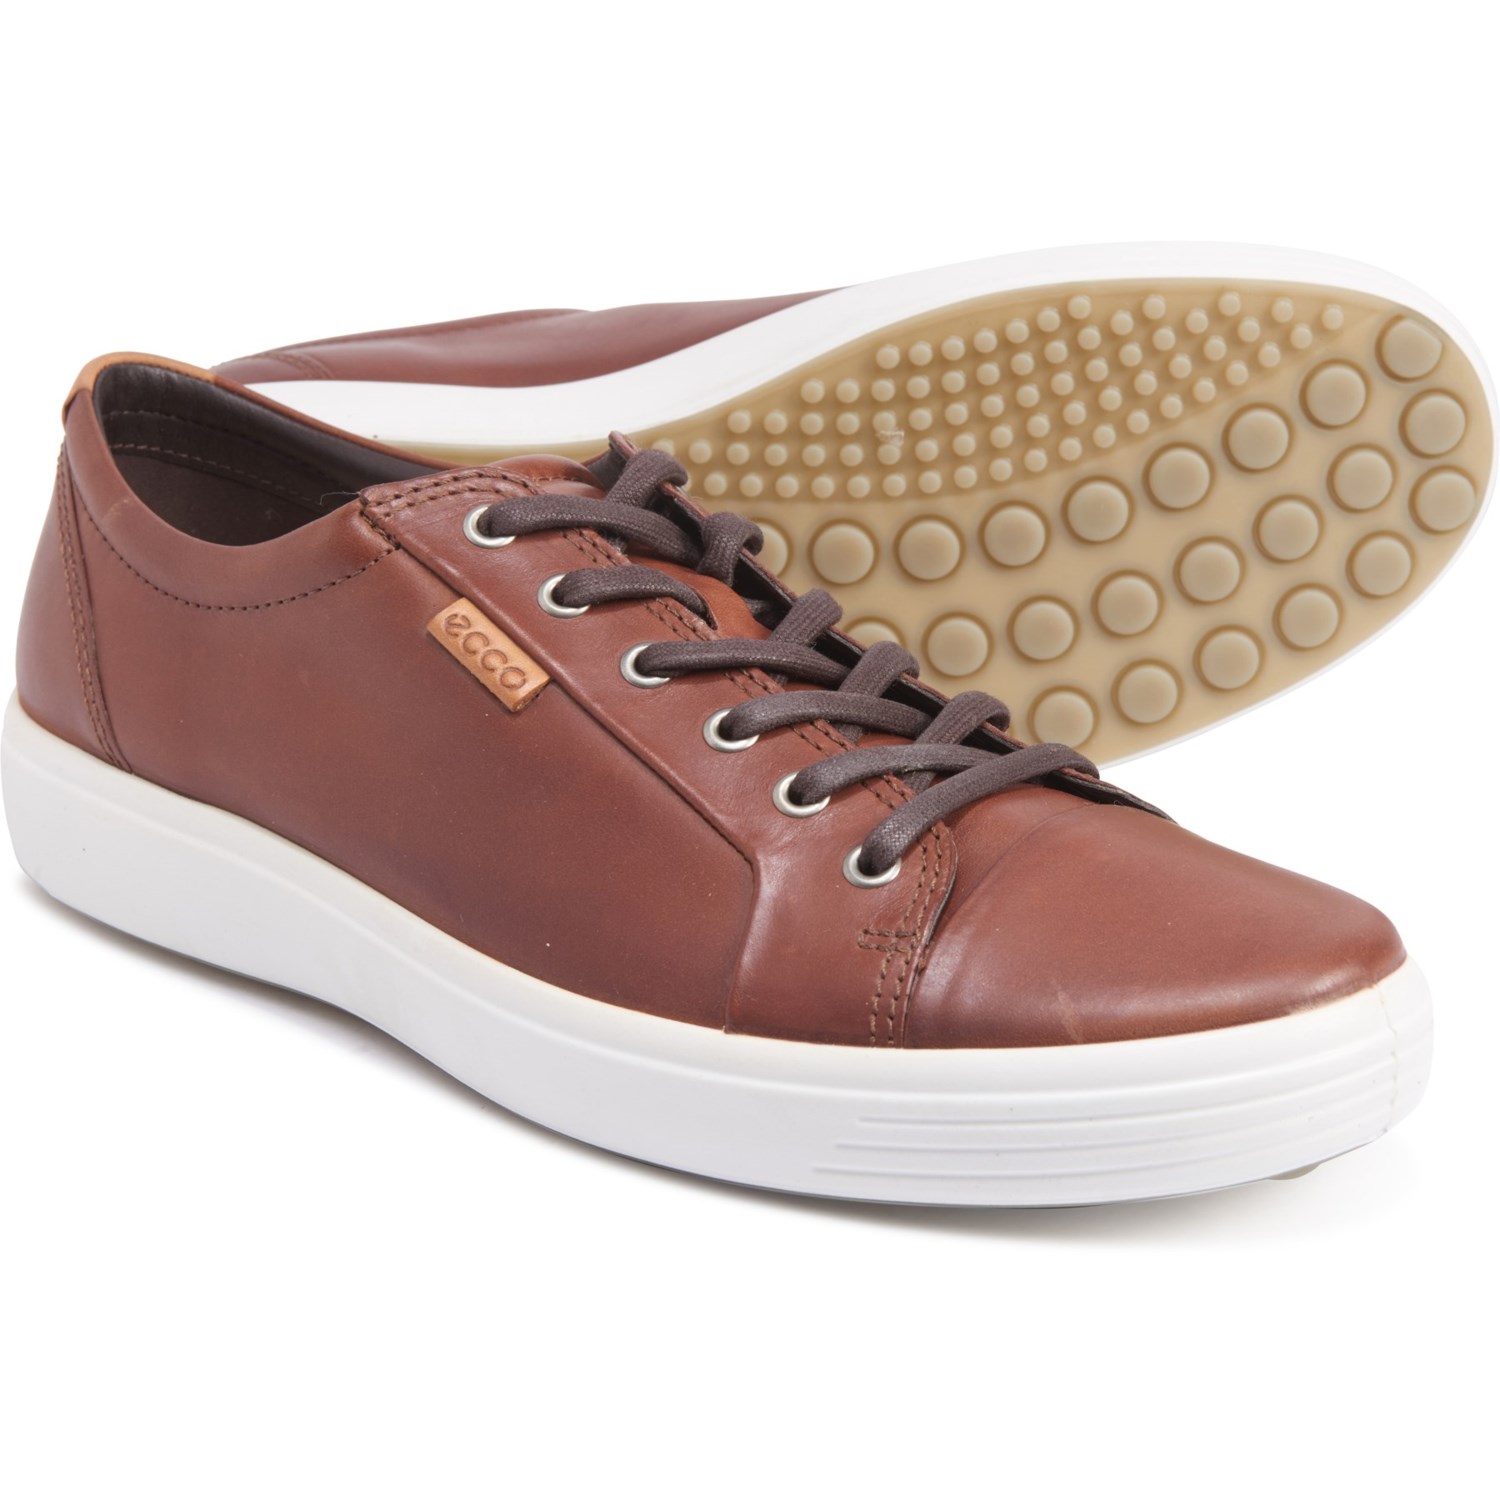 ecco soft leather shoes